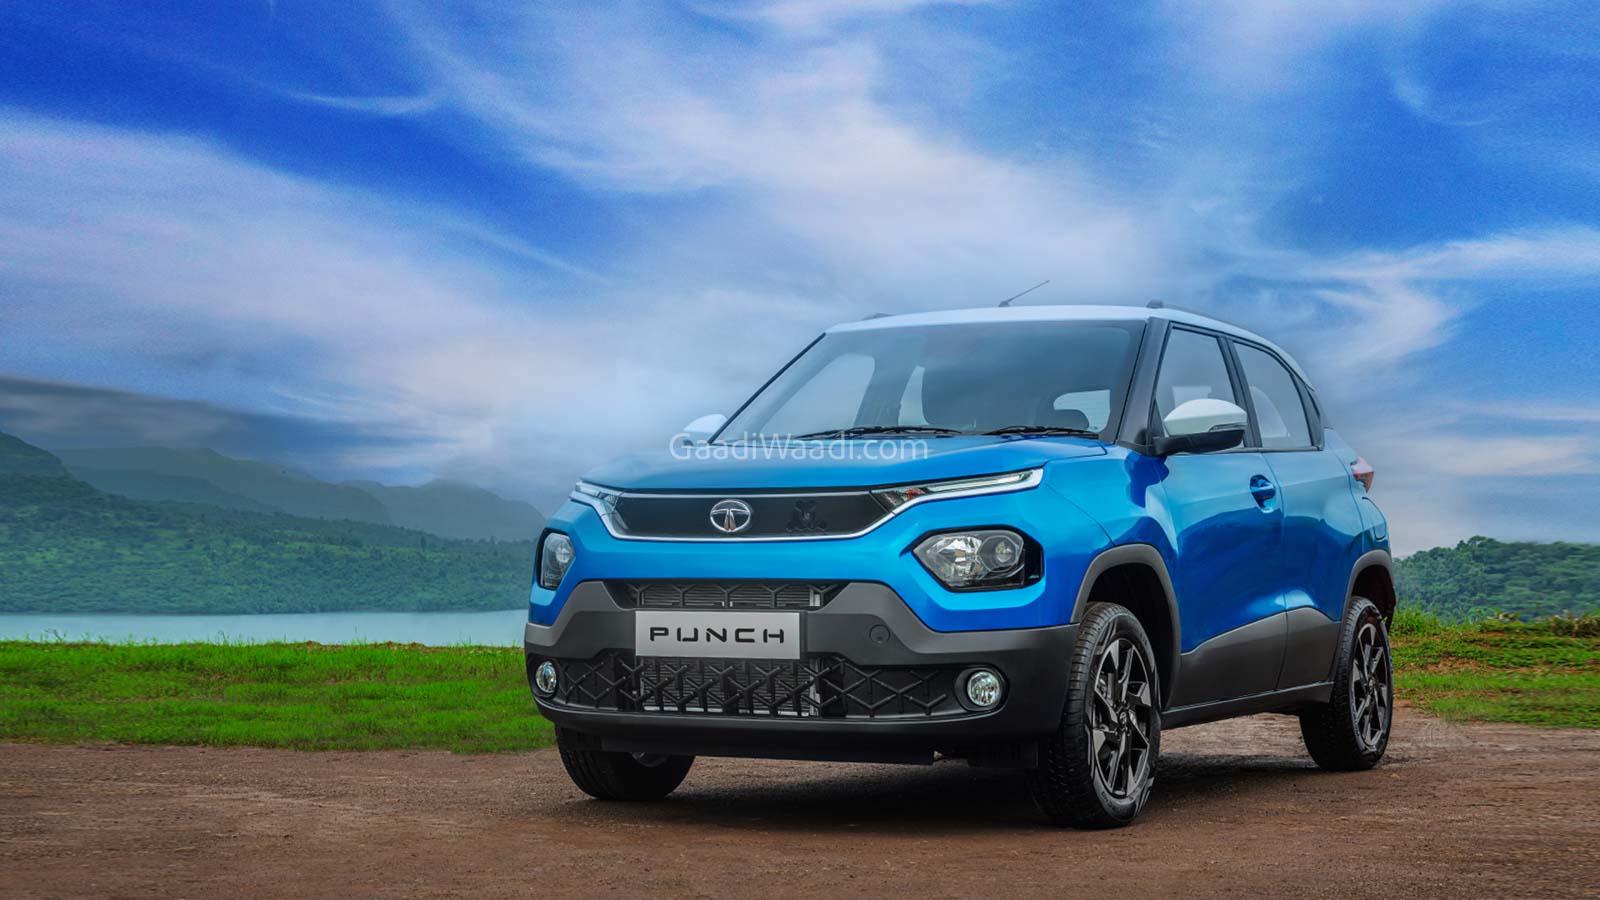 Tata Punch Could Set New Benchmark In Entry Level Space - Here’s Why